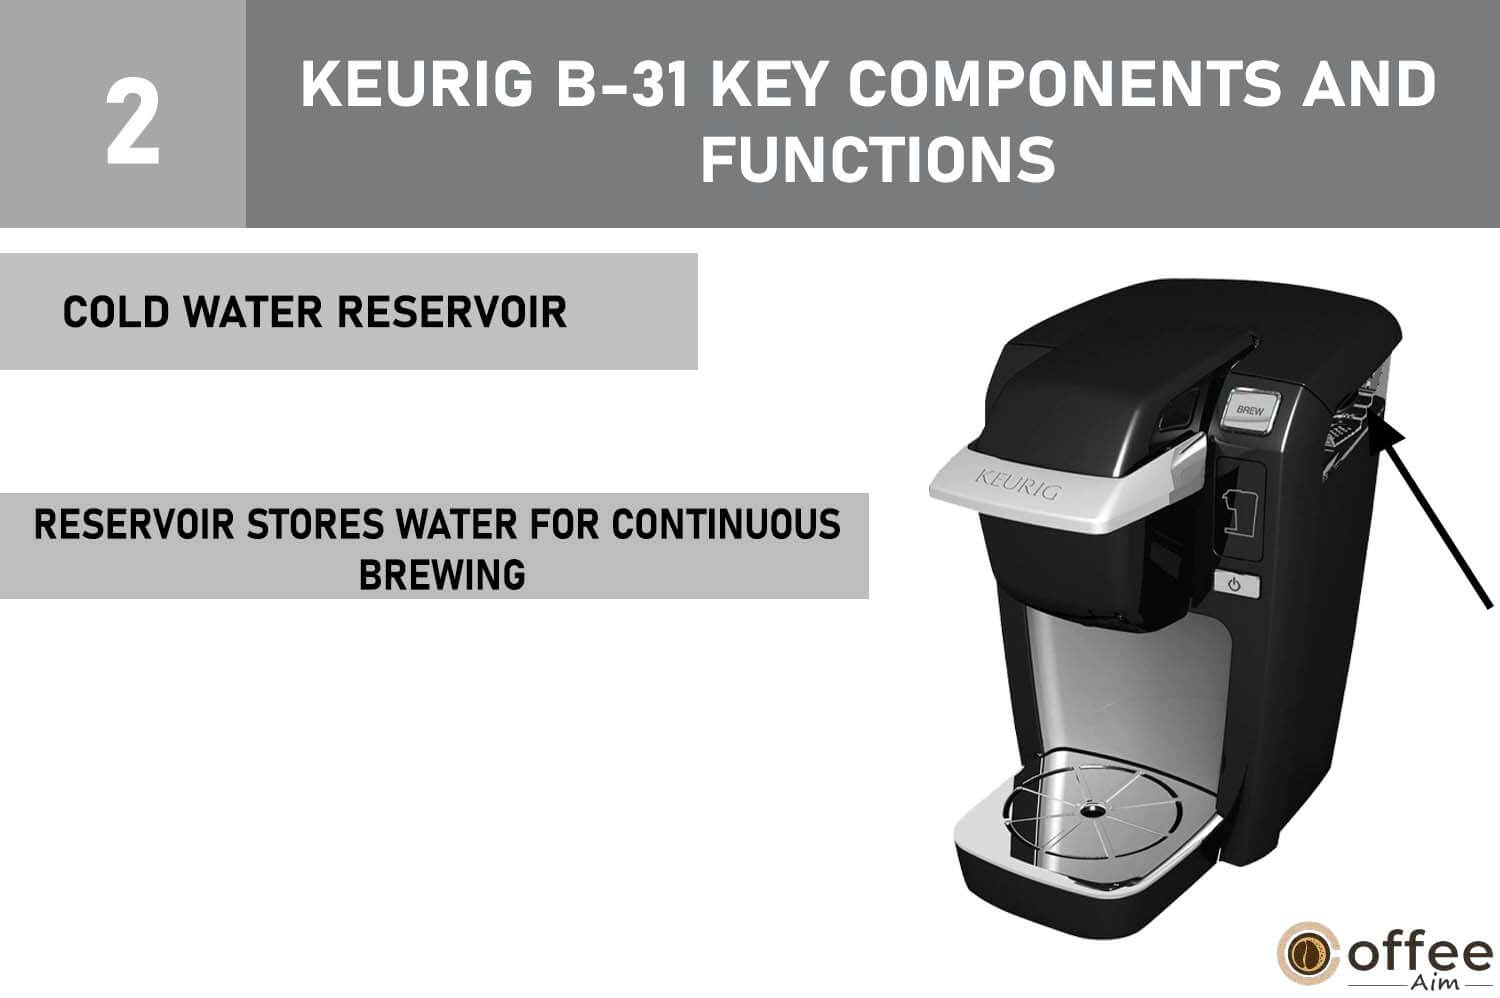 This image illustrates the component labeled as the 'Cold Water Reservoir' on the Keurig B-31 coffee maker, as part of the comprehensive guide on using the Keurig B-31.